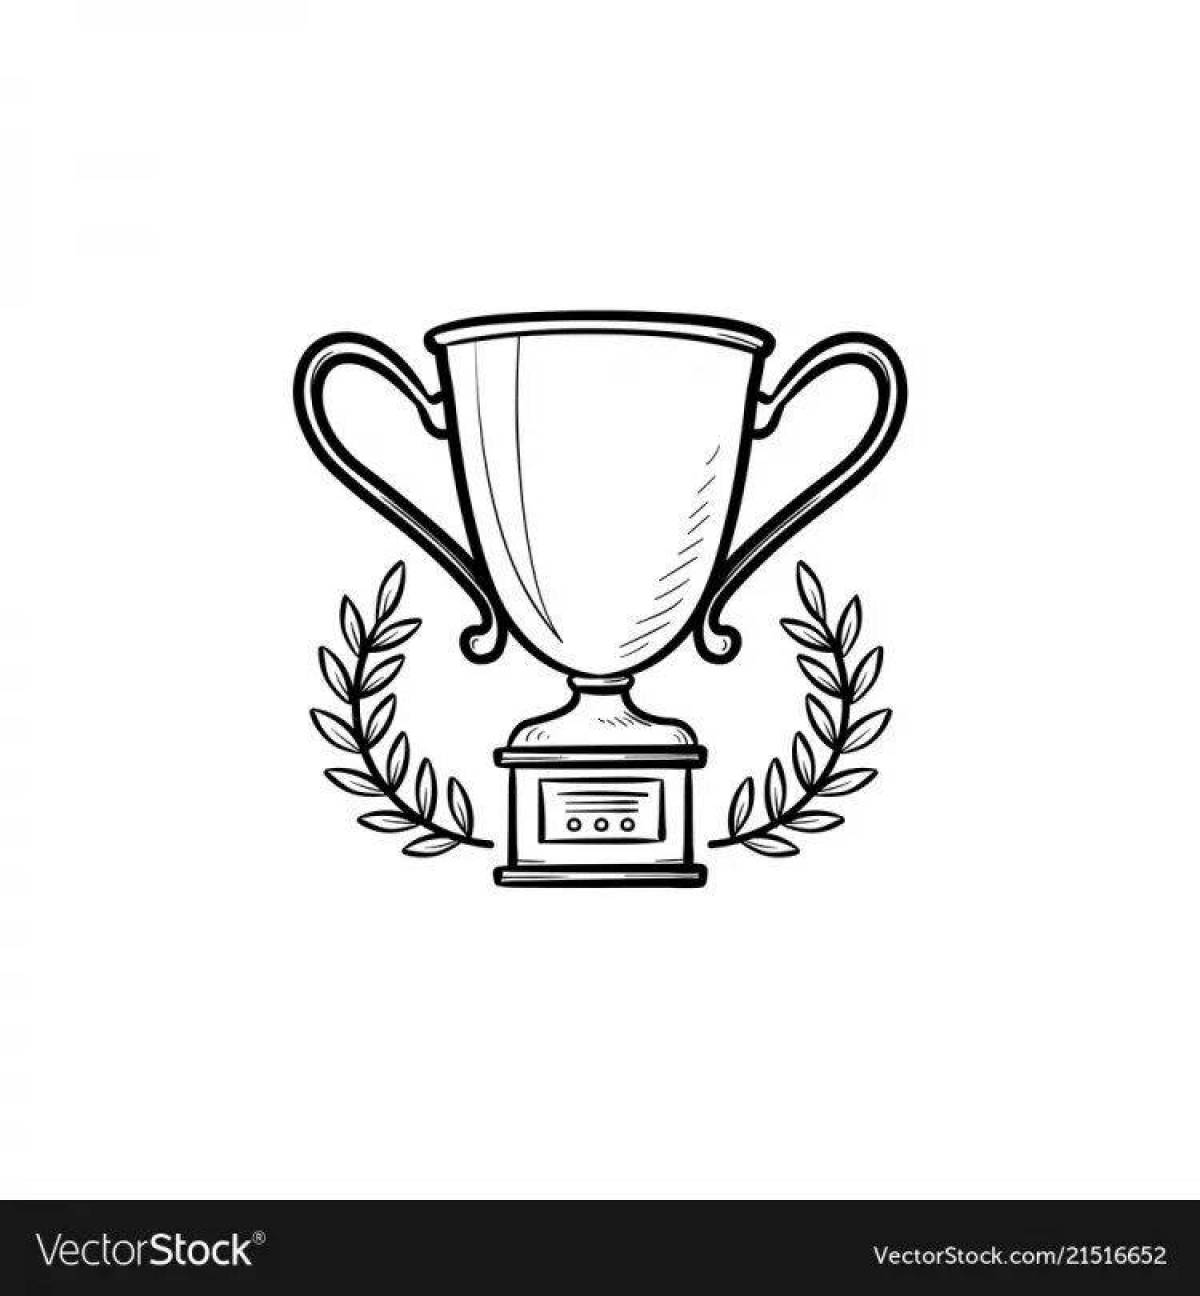 Rampant Winner's Cup coloring page